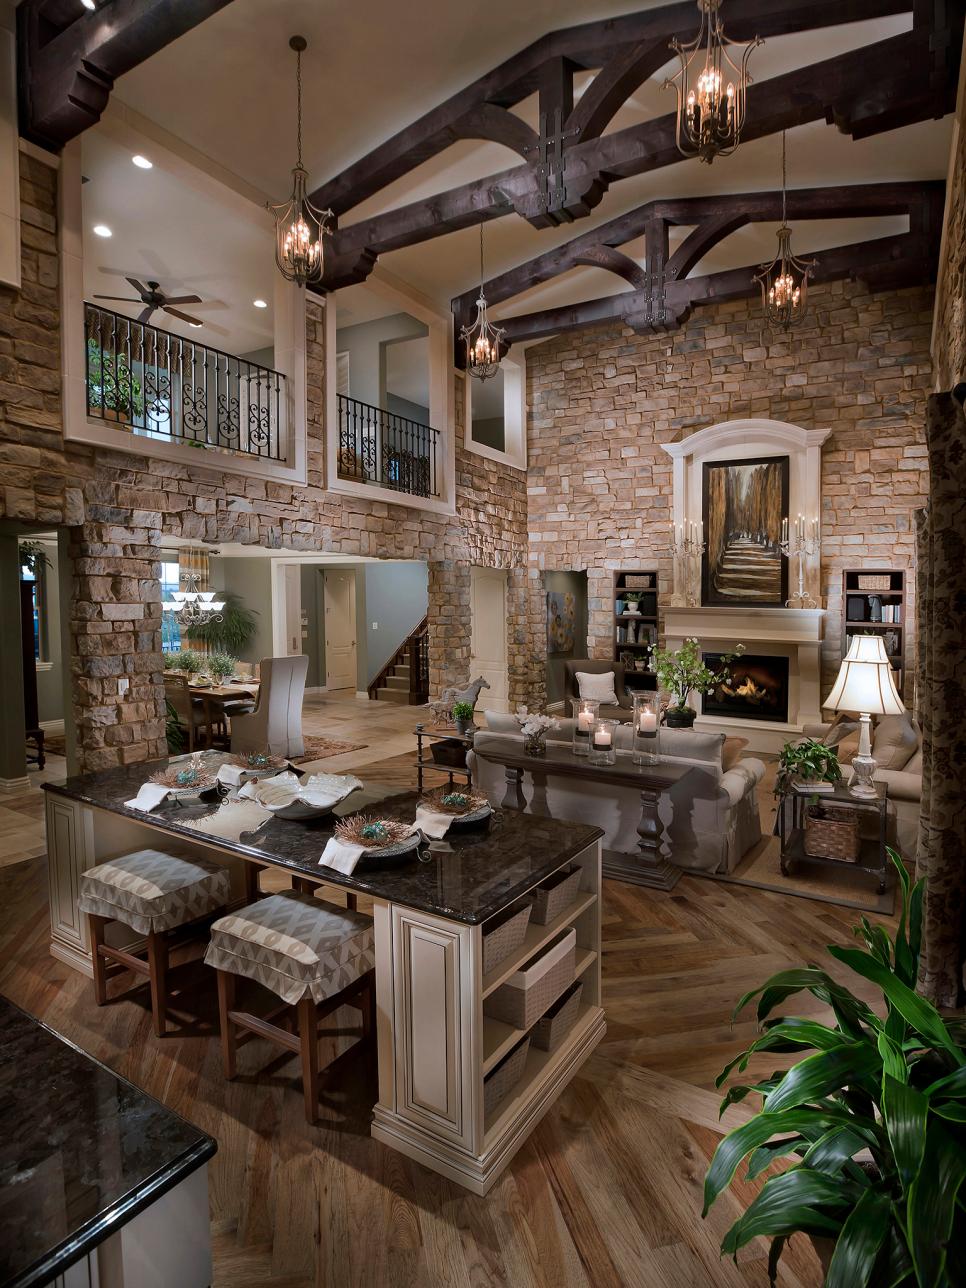 Two-Story Stone Great Room With Timber Trusses & Neutral Furnishings